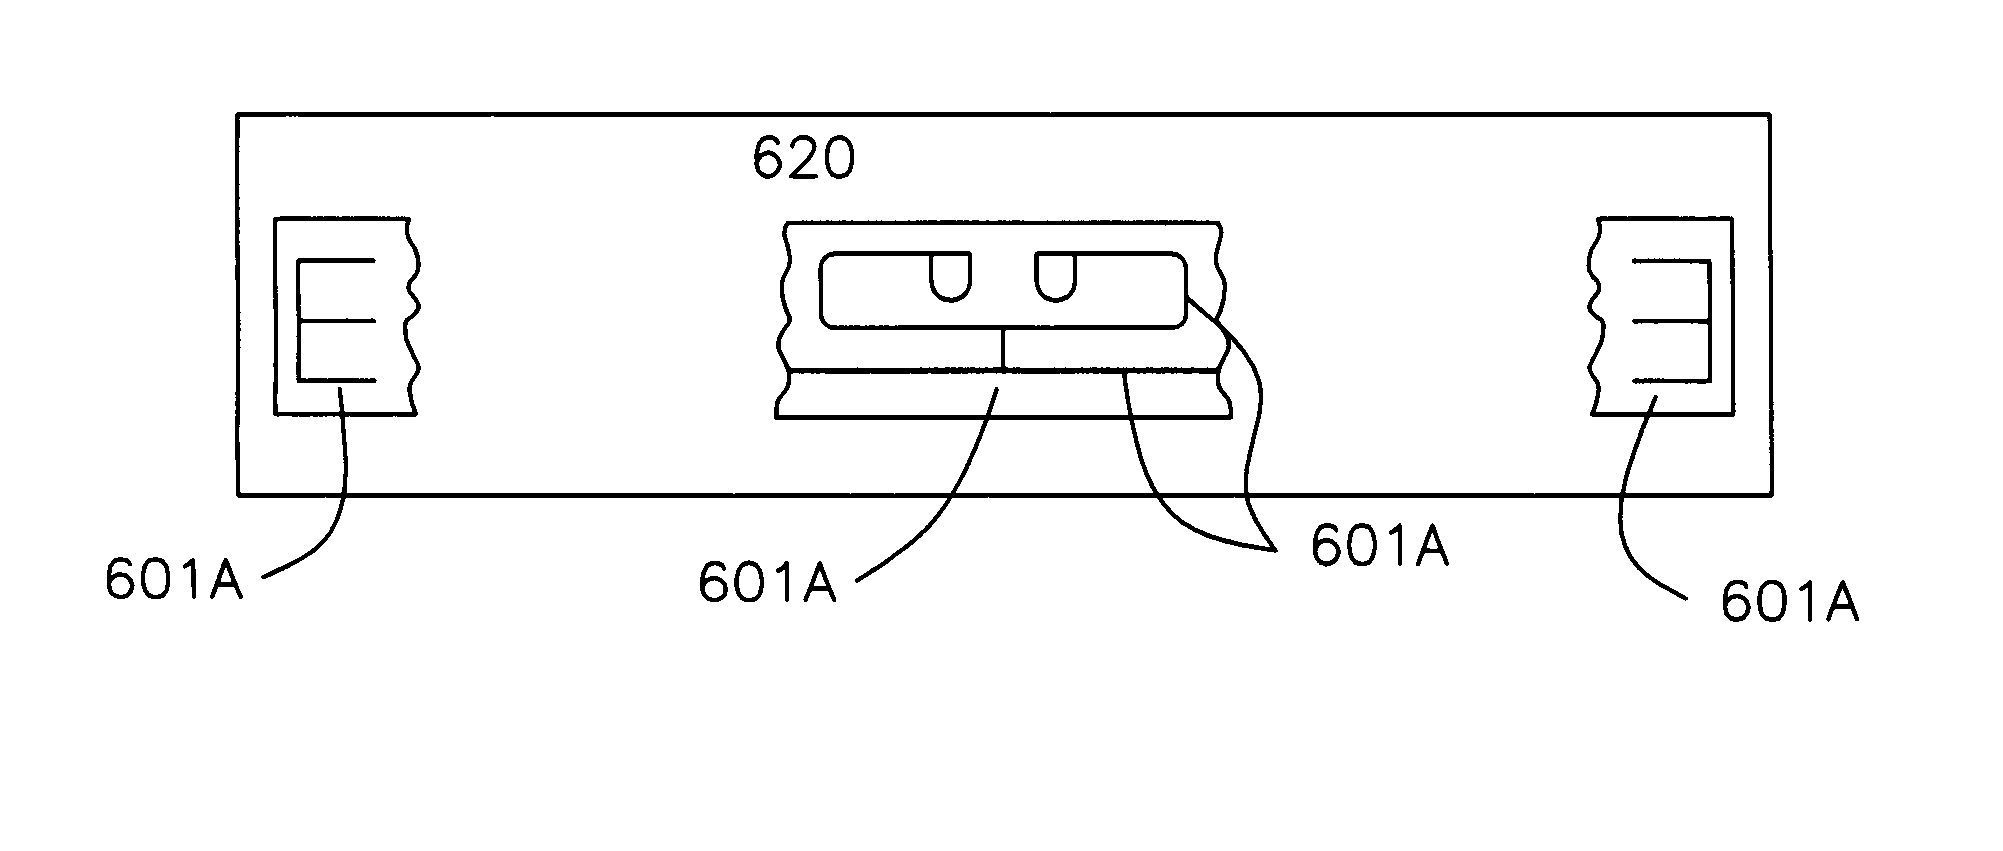 System and method for altering or disabling RFID tags